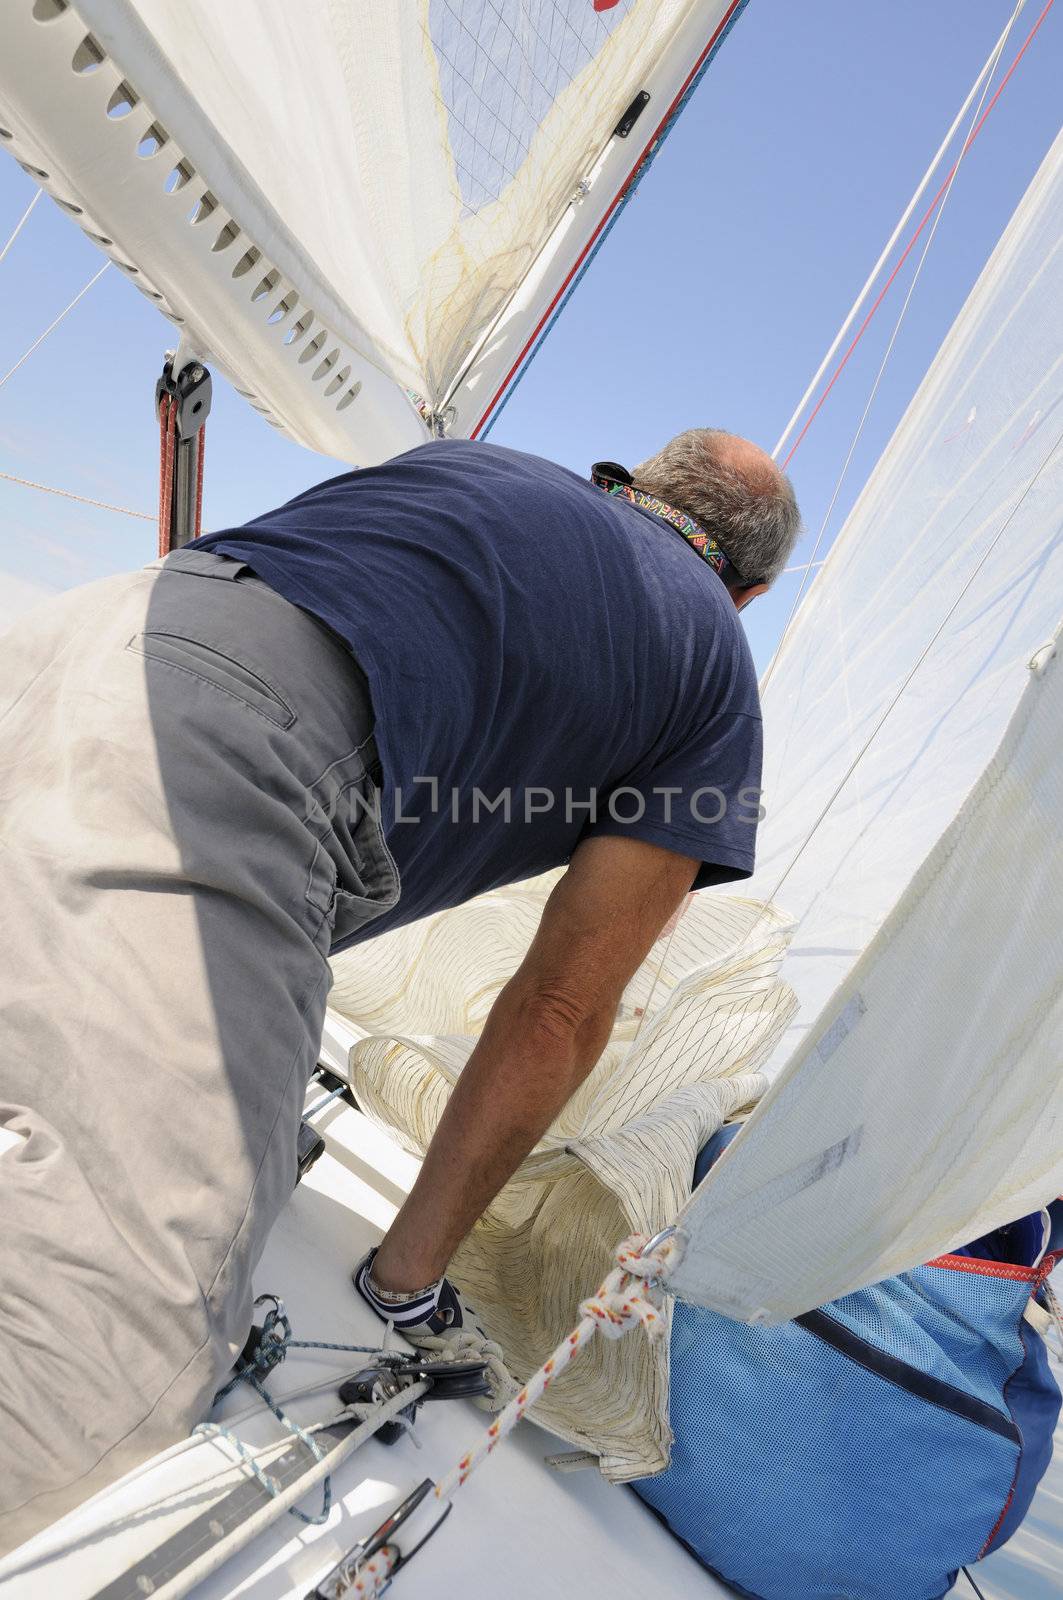 Man on a boat with sails and ropes